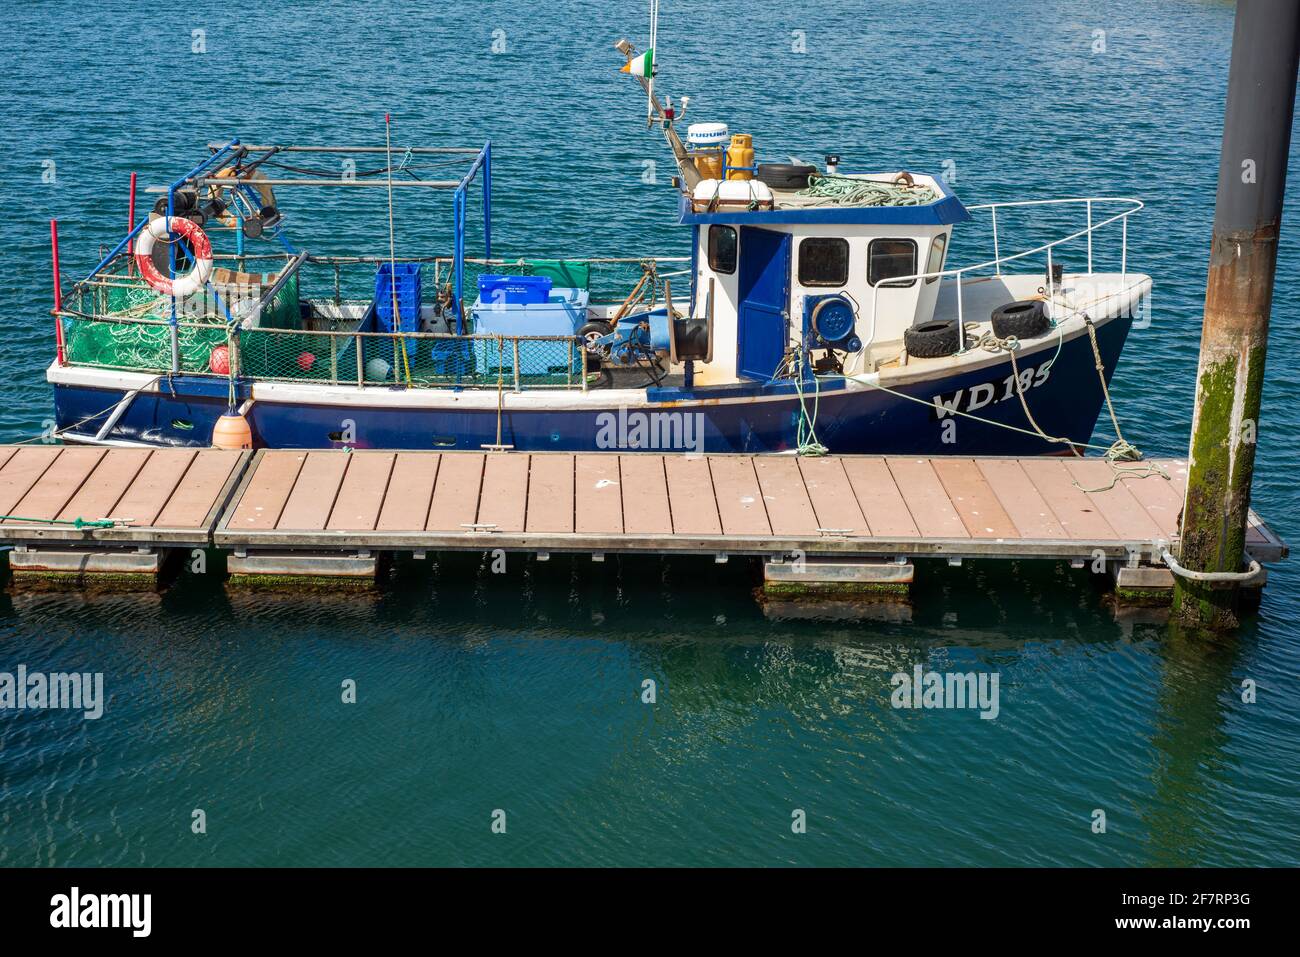 Blue fishing boat with Irish flag moored in the Dingle harbour and marina, Dingle, County Kerry, Ireland Stock Photo